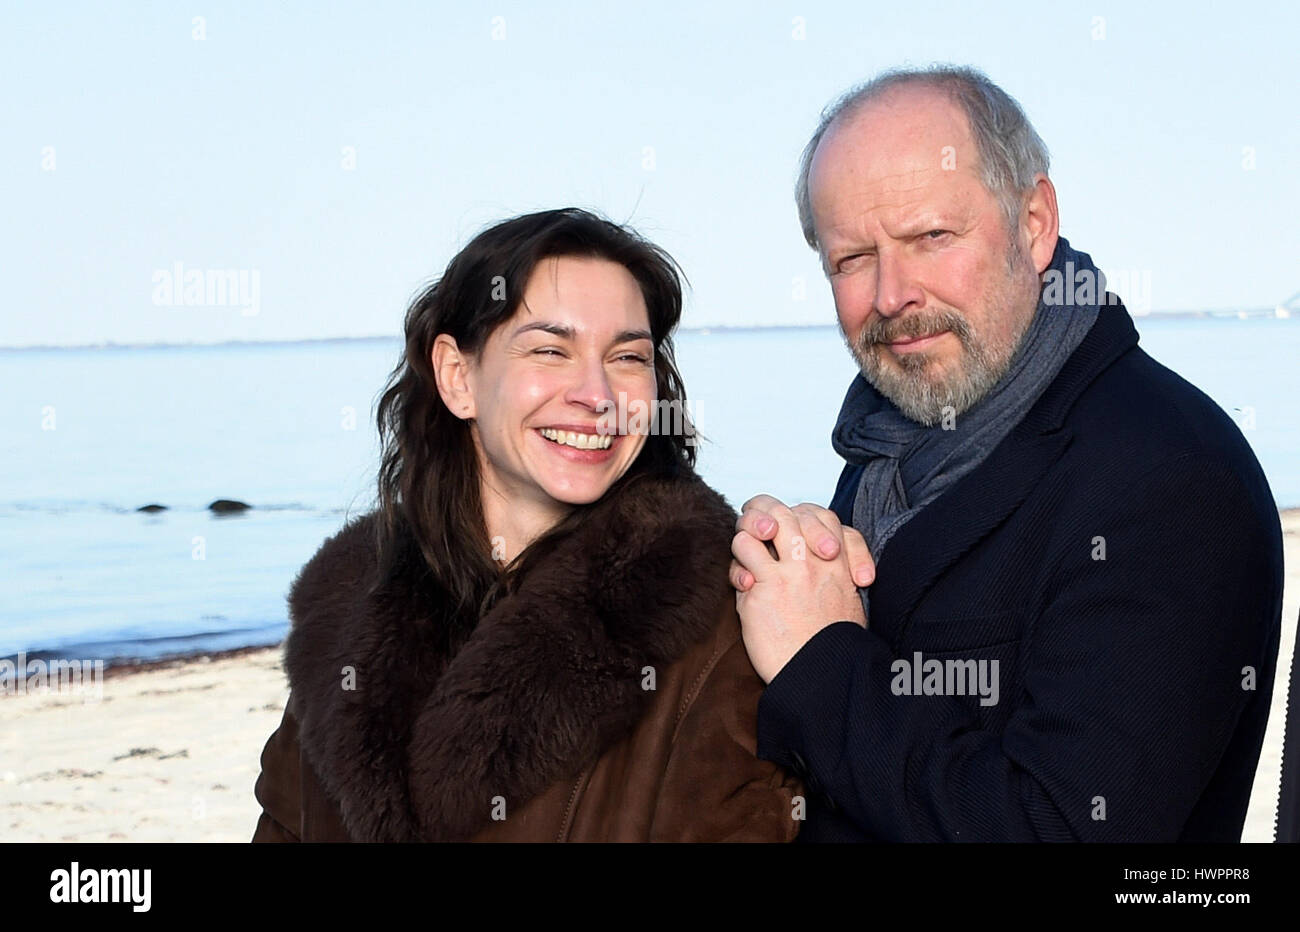 Heiligenhafen, Germany. 22nd Mar, 2017. The actors Axel Milberg and Christiane Paul during a photocall for the new NDR Tatort series episode 'Borowski und das Land zwischen den Meeren' (lit. 'Borowski and the land between the oceans') in Heiligenhafen, Germany, 22 March 2017. The episode will be aired in 2018. Photo: Carsten Rehder/dpa/Alamy Live News Stock Photo